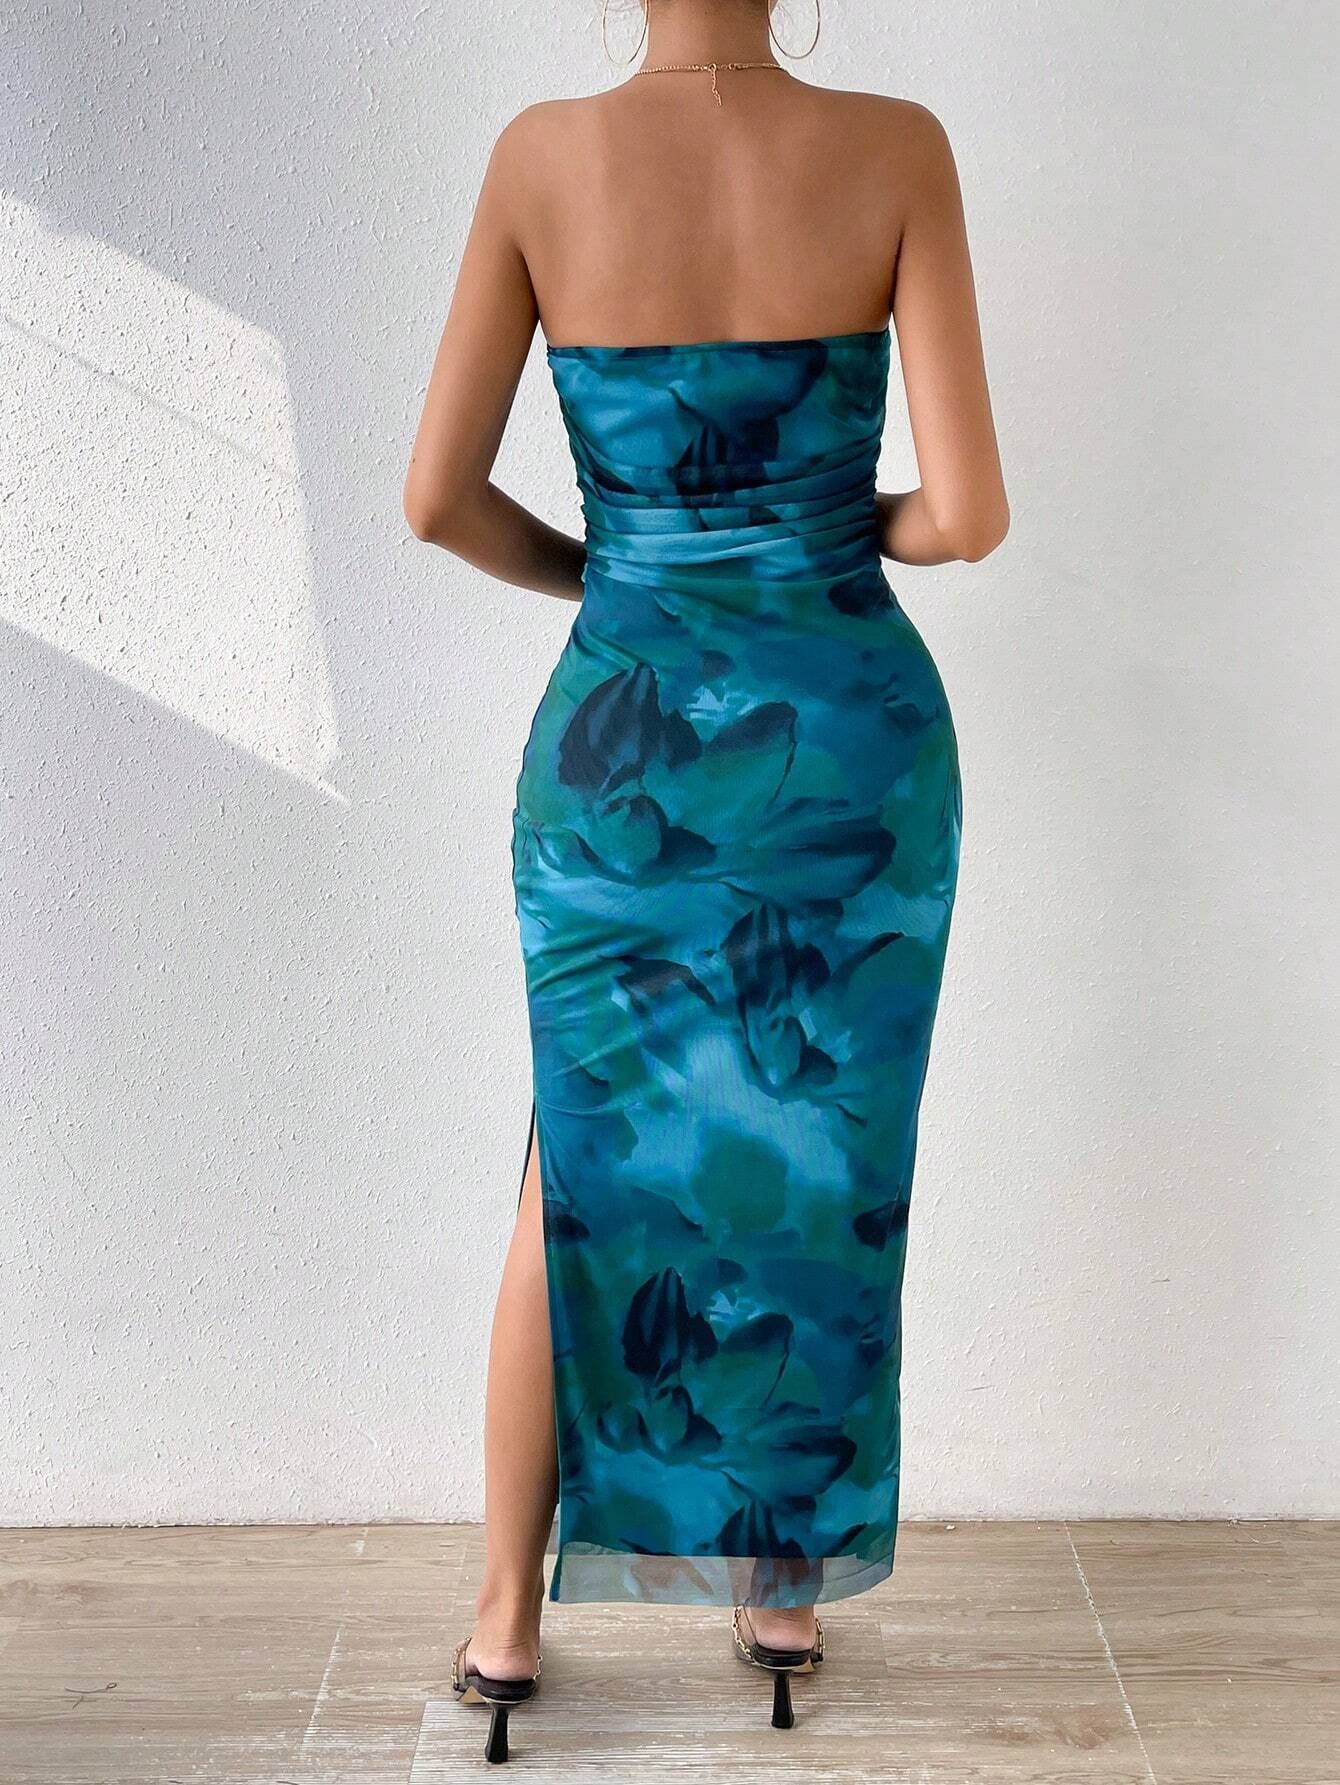 🎁Last Day 40% Off-🌸Floral Bodycon Maxi Dress with Off-Shoulder Design and High Slit